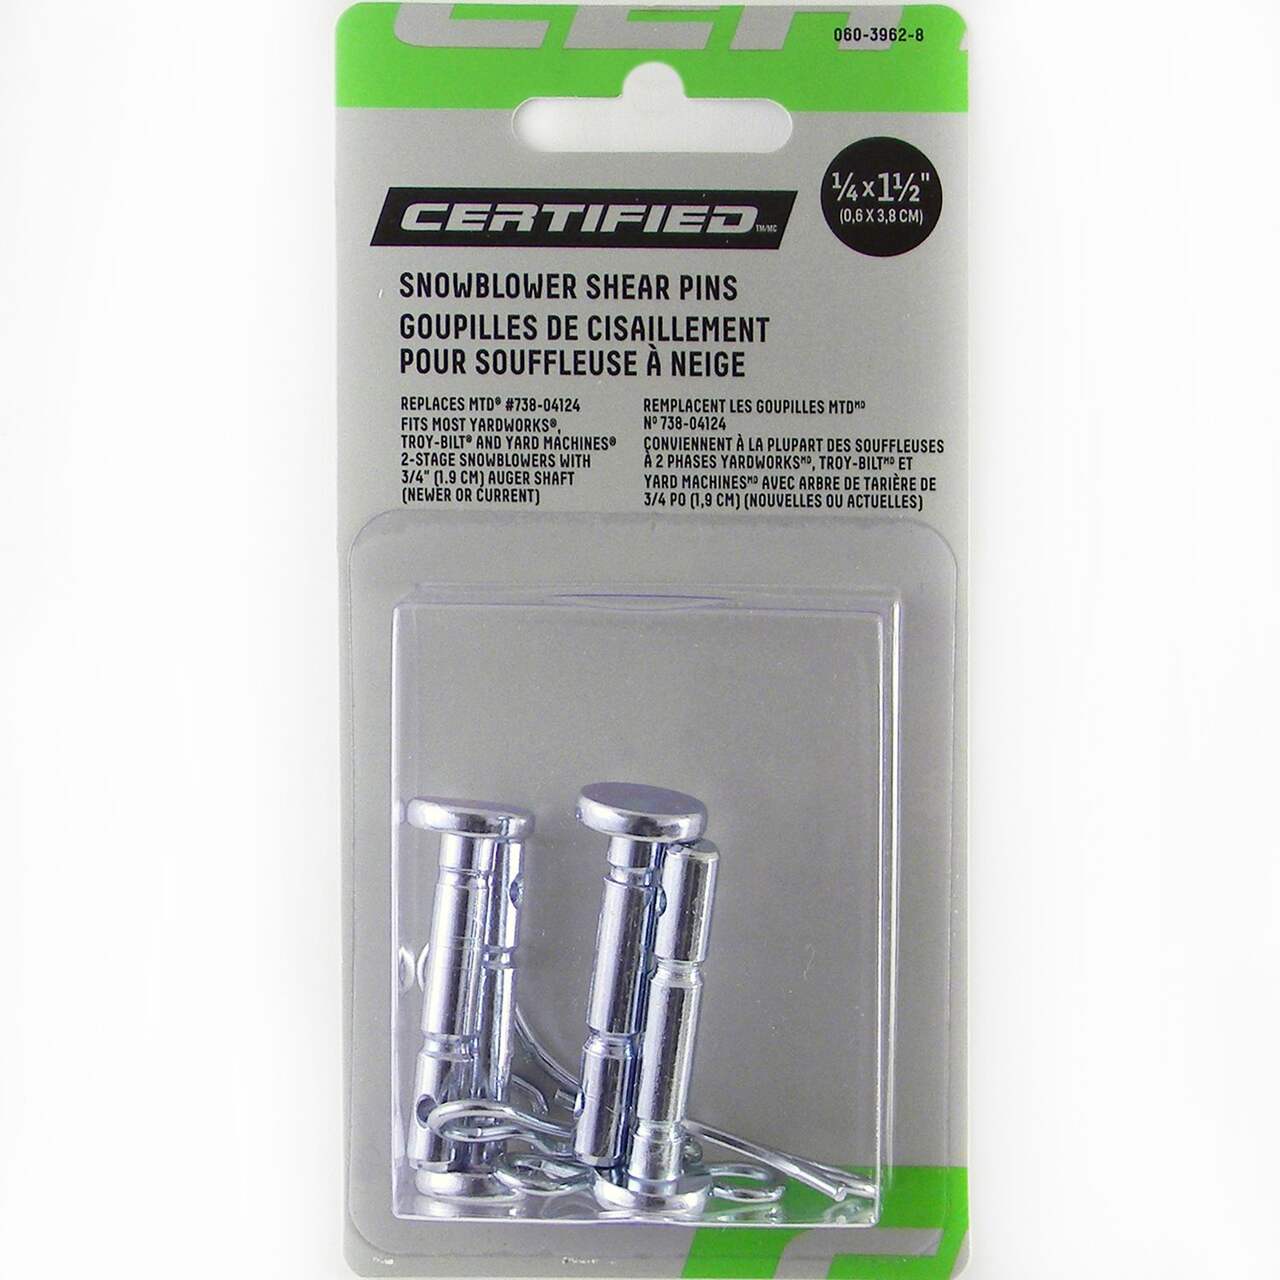 https://media-www.canadiantire.ca/product/seasonal-gardening/outdoor-tools/tractor-lawn-mower-snowthrower-parts/0603962/shear-pins-1-4x1-5--c301719a-56f5-49b9-bc05-81b6c2649e9d-jpgrendition.jpg?imdensity=1&imwidth=1244&impolicy=mZoom